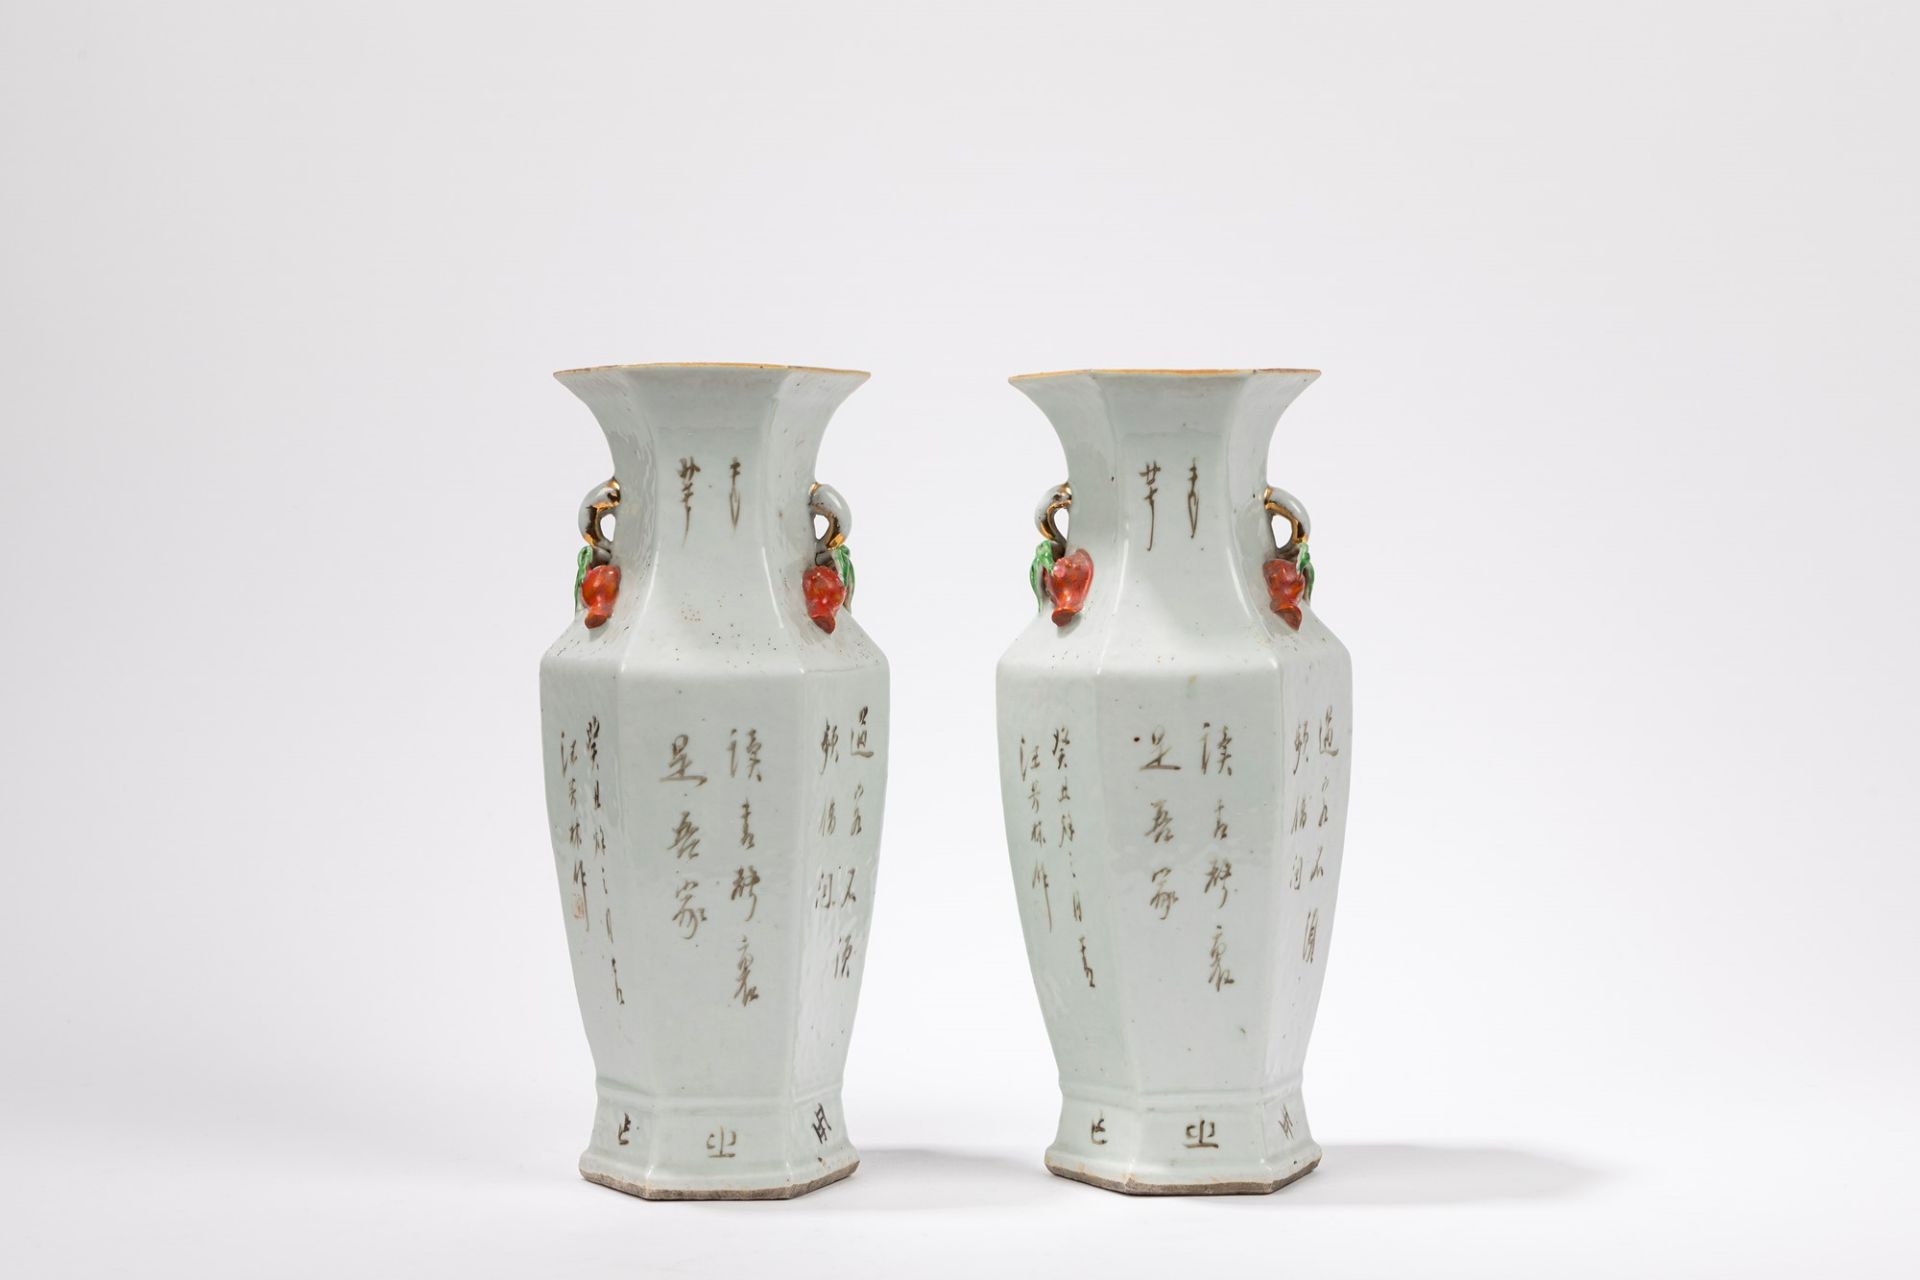 A PAIR OF HEXAGONAL BALUSTER SHAPED QIANJIANGCAI VASES, China, late 19th / early 20th century - Image 2 of 3